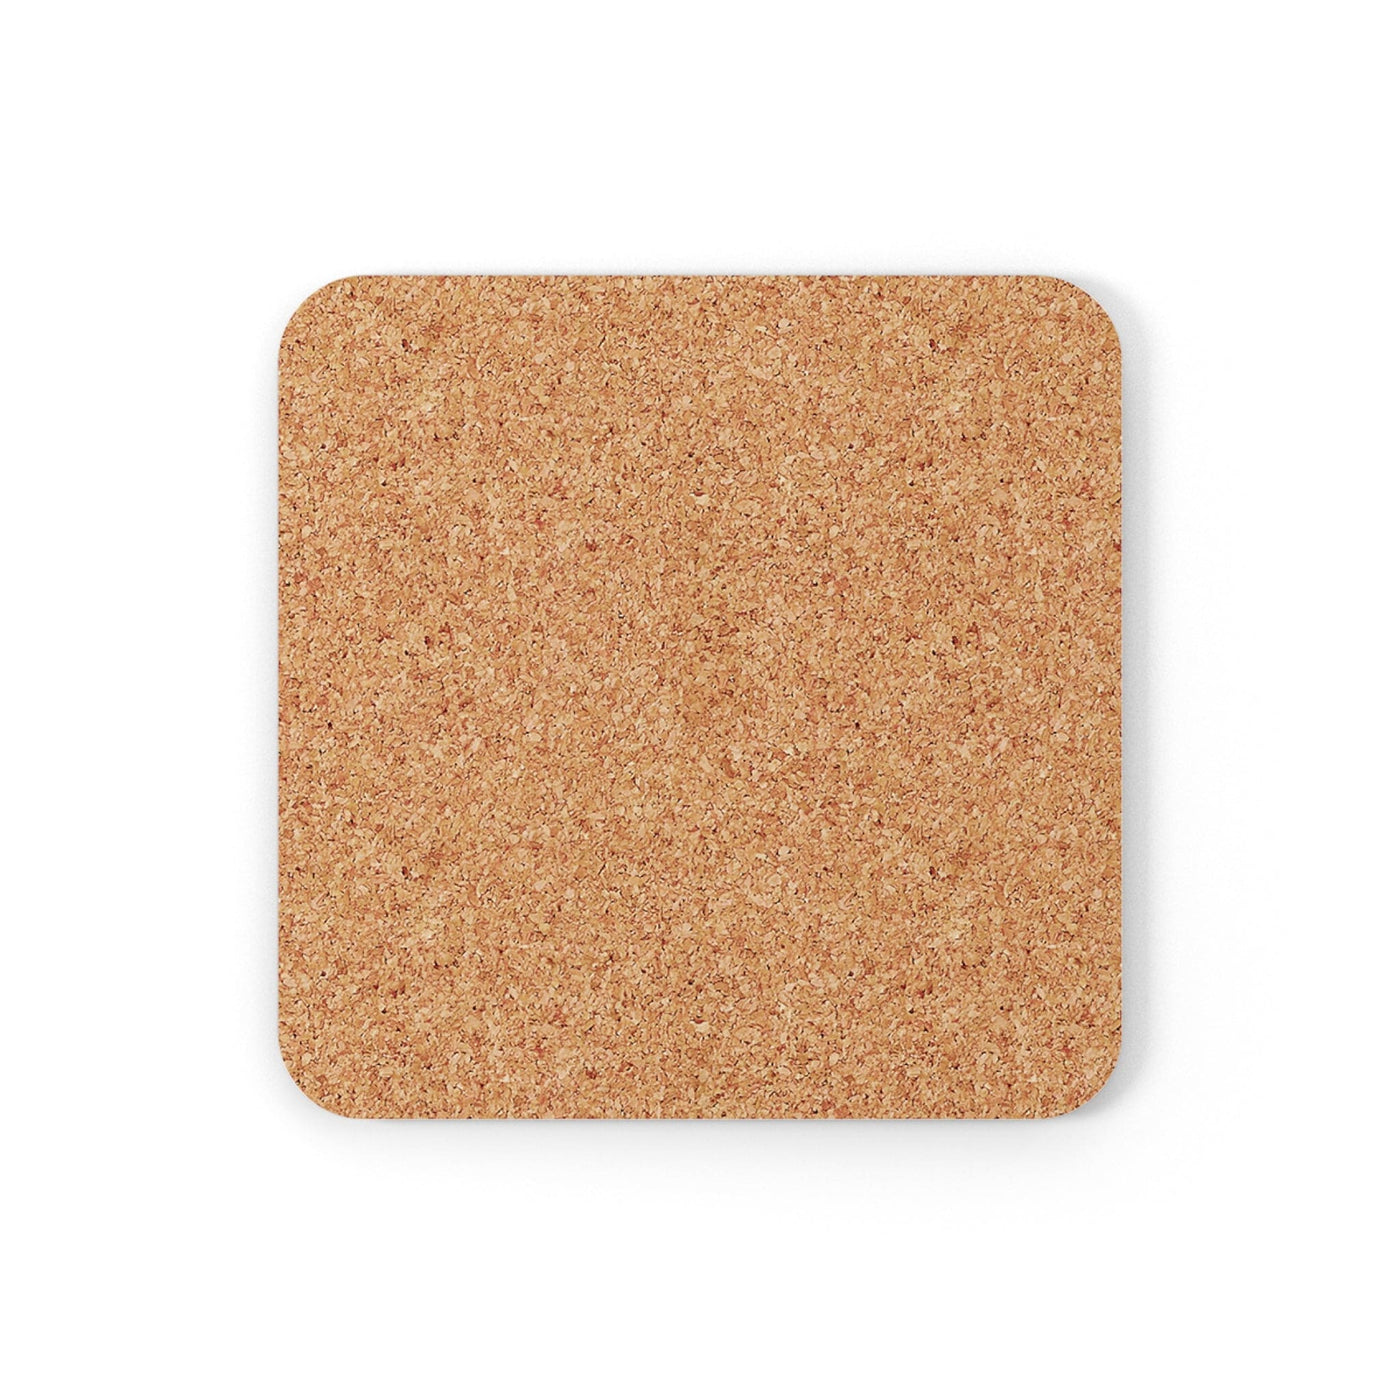 Coaster Set Of 4 For Drinks Brown White Stone Pattern - Decorative | Coasters